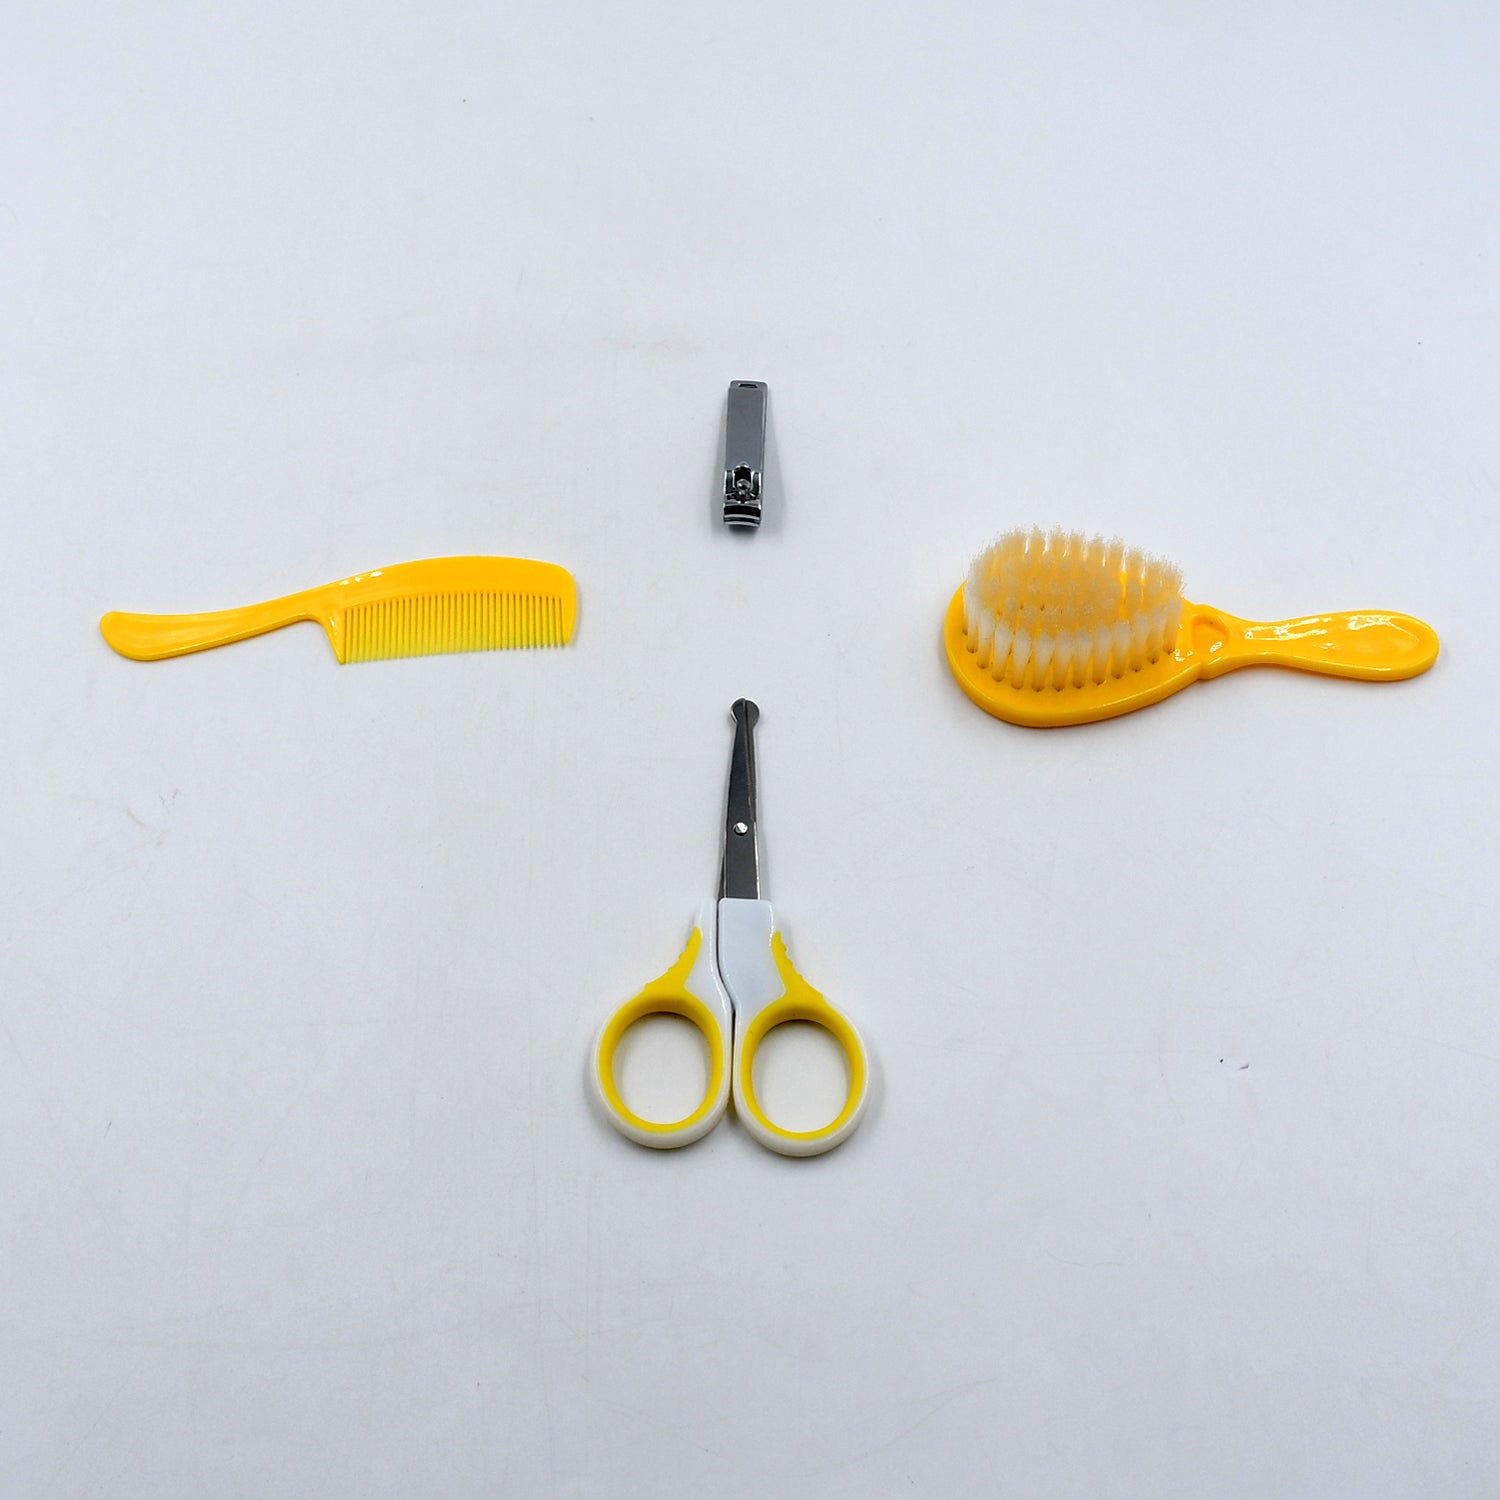 6546 Born Baby Health Care Kit Baby Health Care And Grooming Kit 4 in 1 Nail Clipper Brush Comb Scissors Baby Safety Care Kit